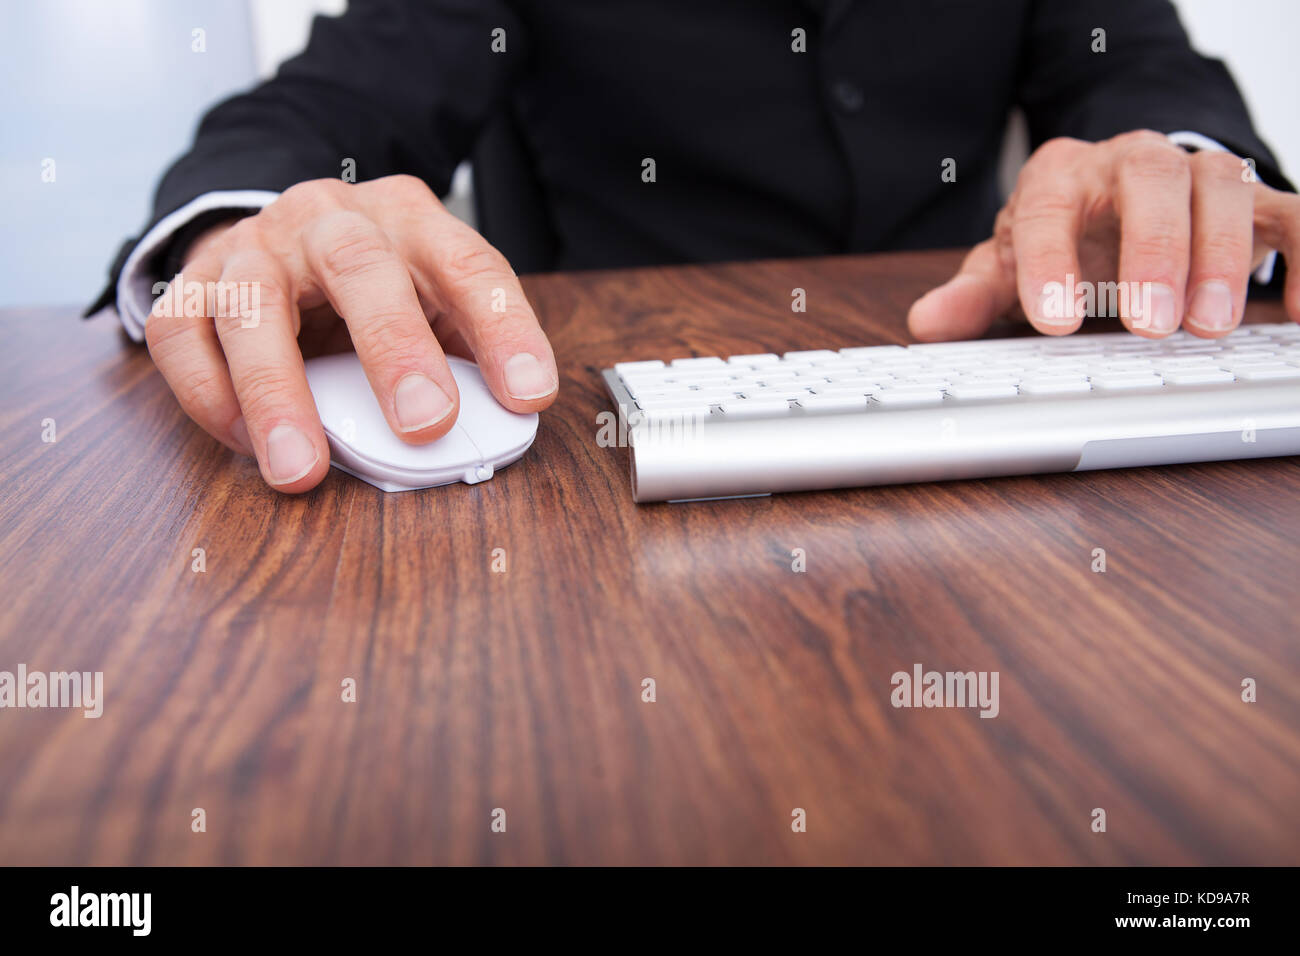 Close-up of businessman's hand using computer at desk Banque D'Images